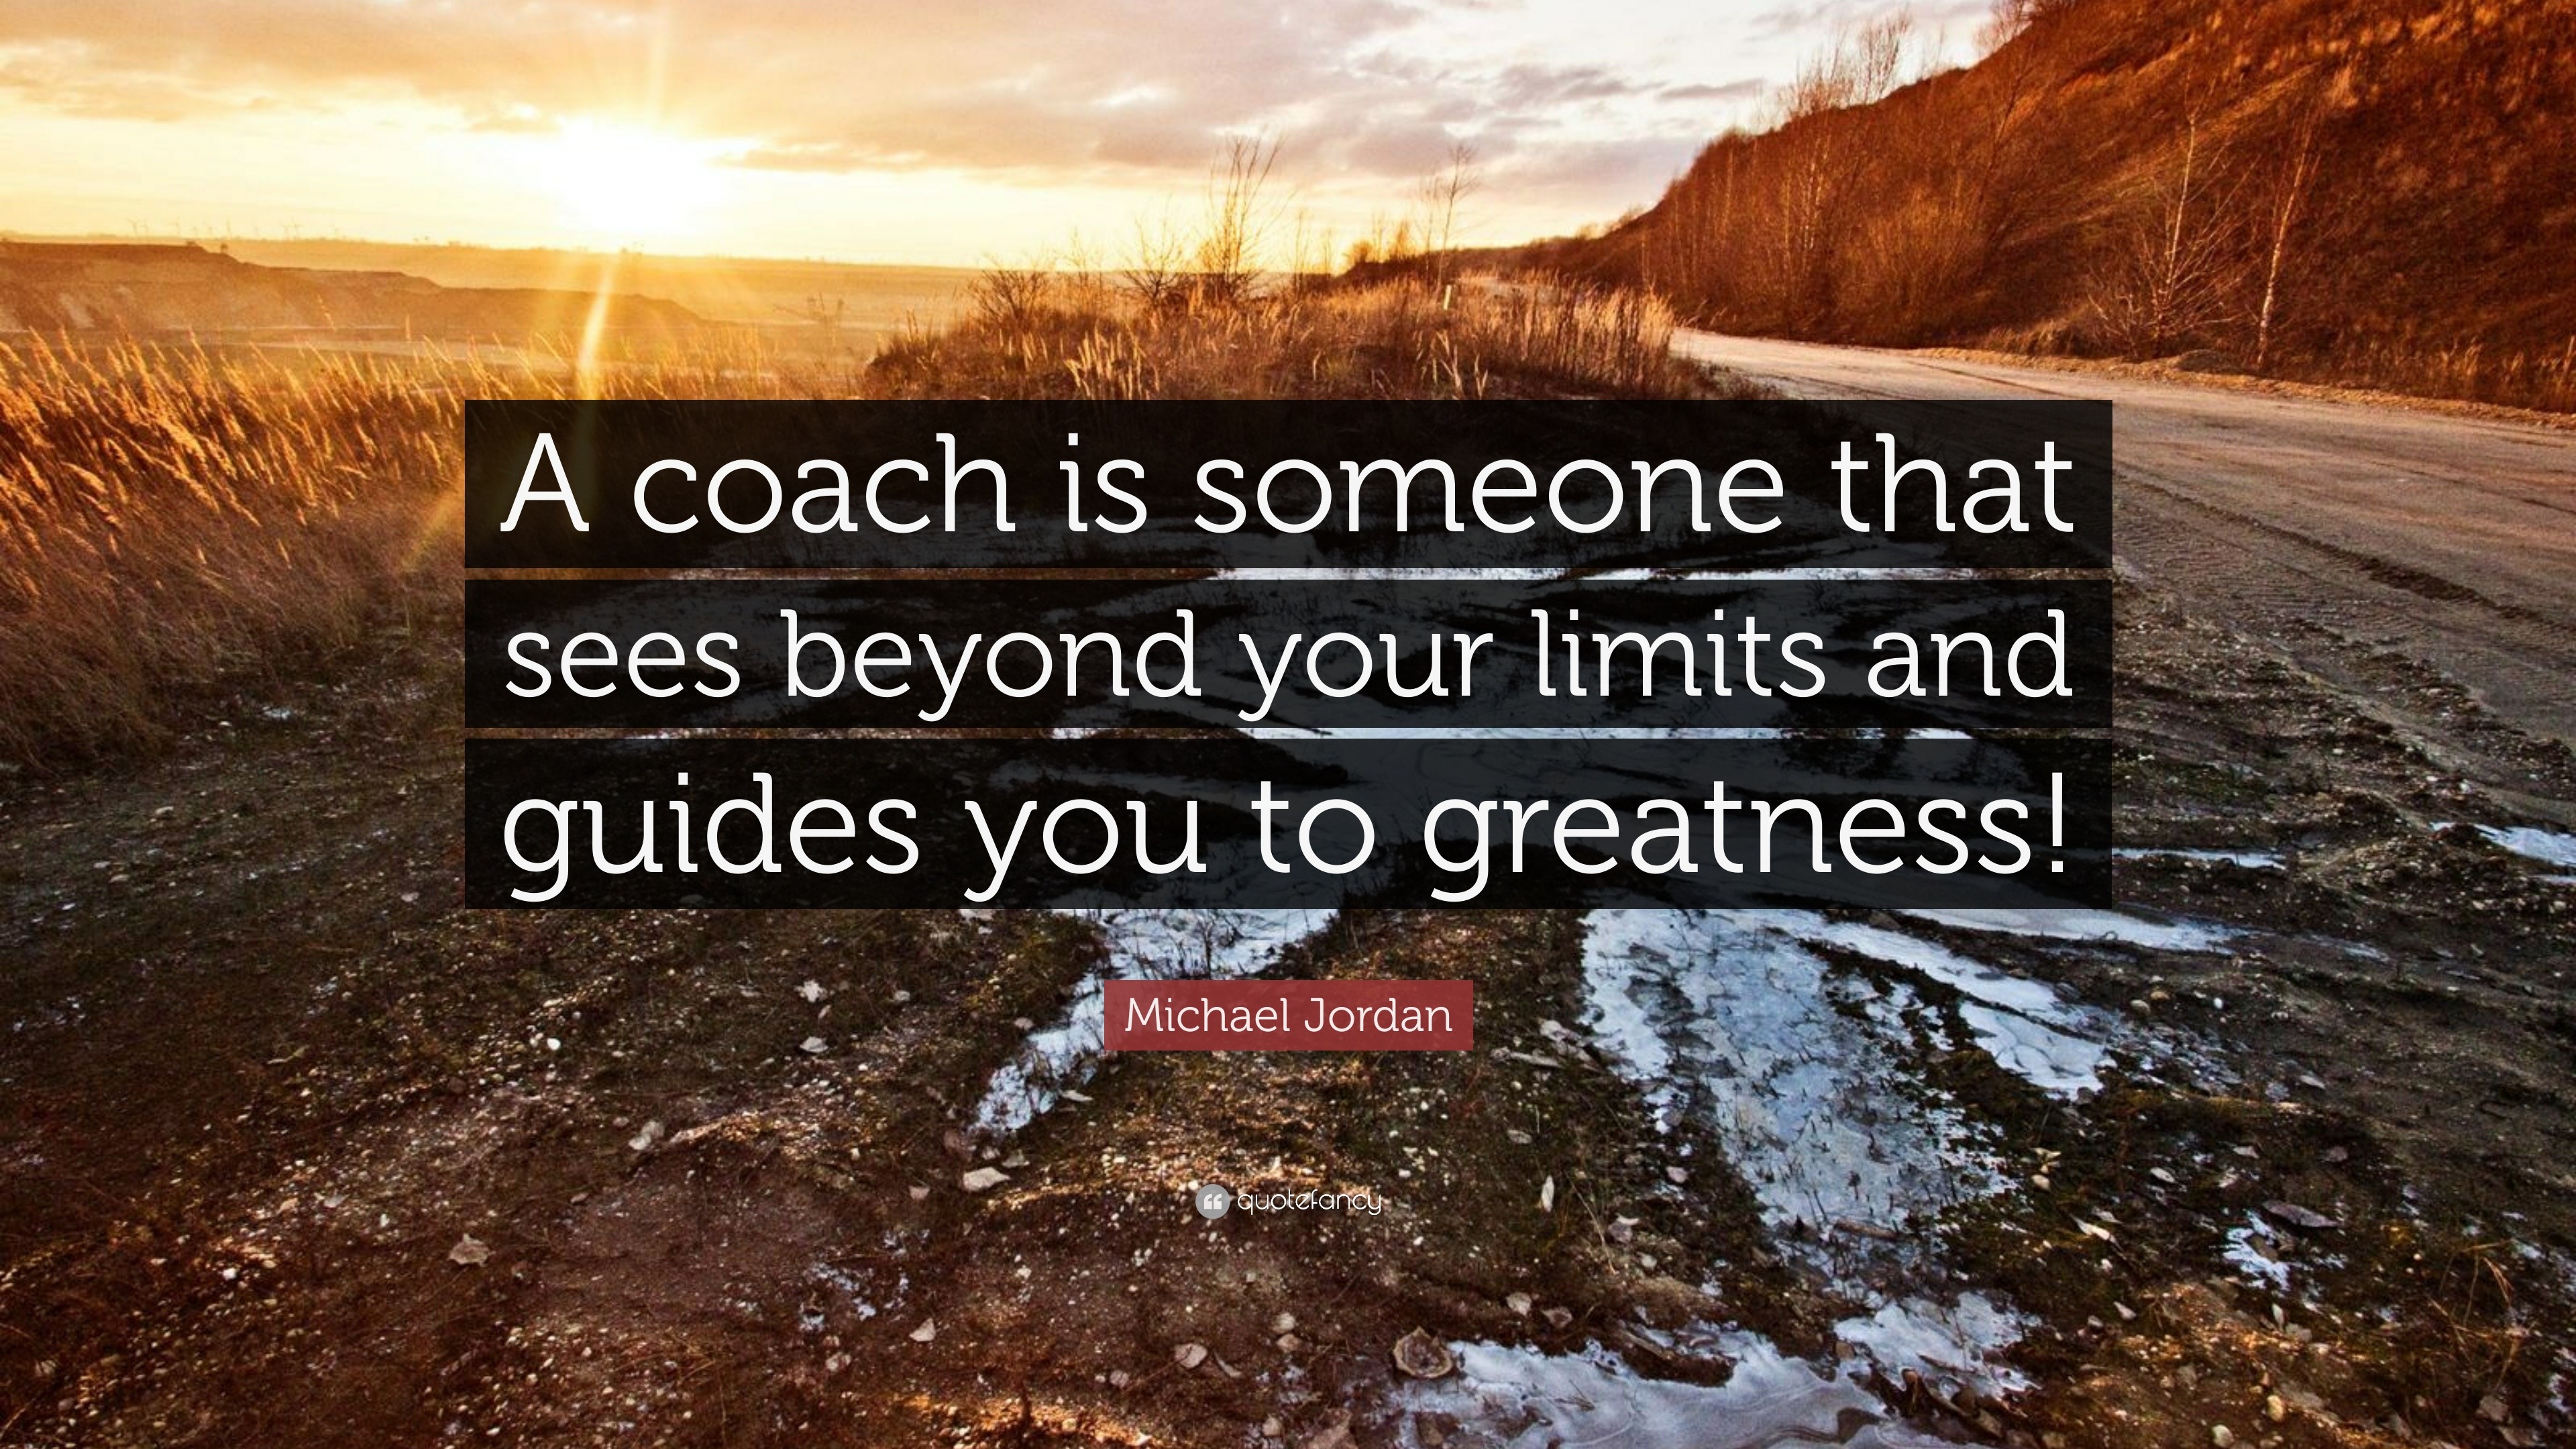 Michael Jordan Quote: “A coach is someone that sees beyond your limits